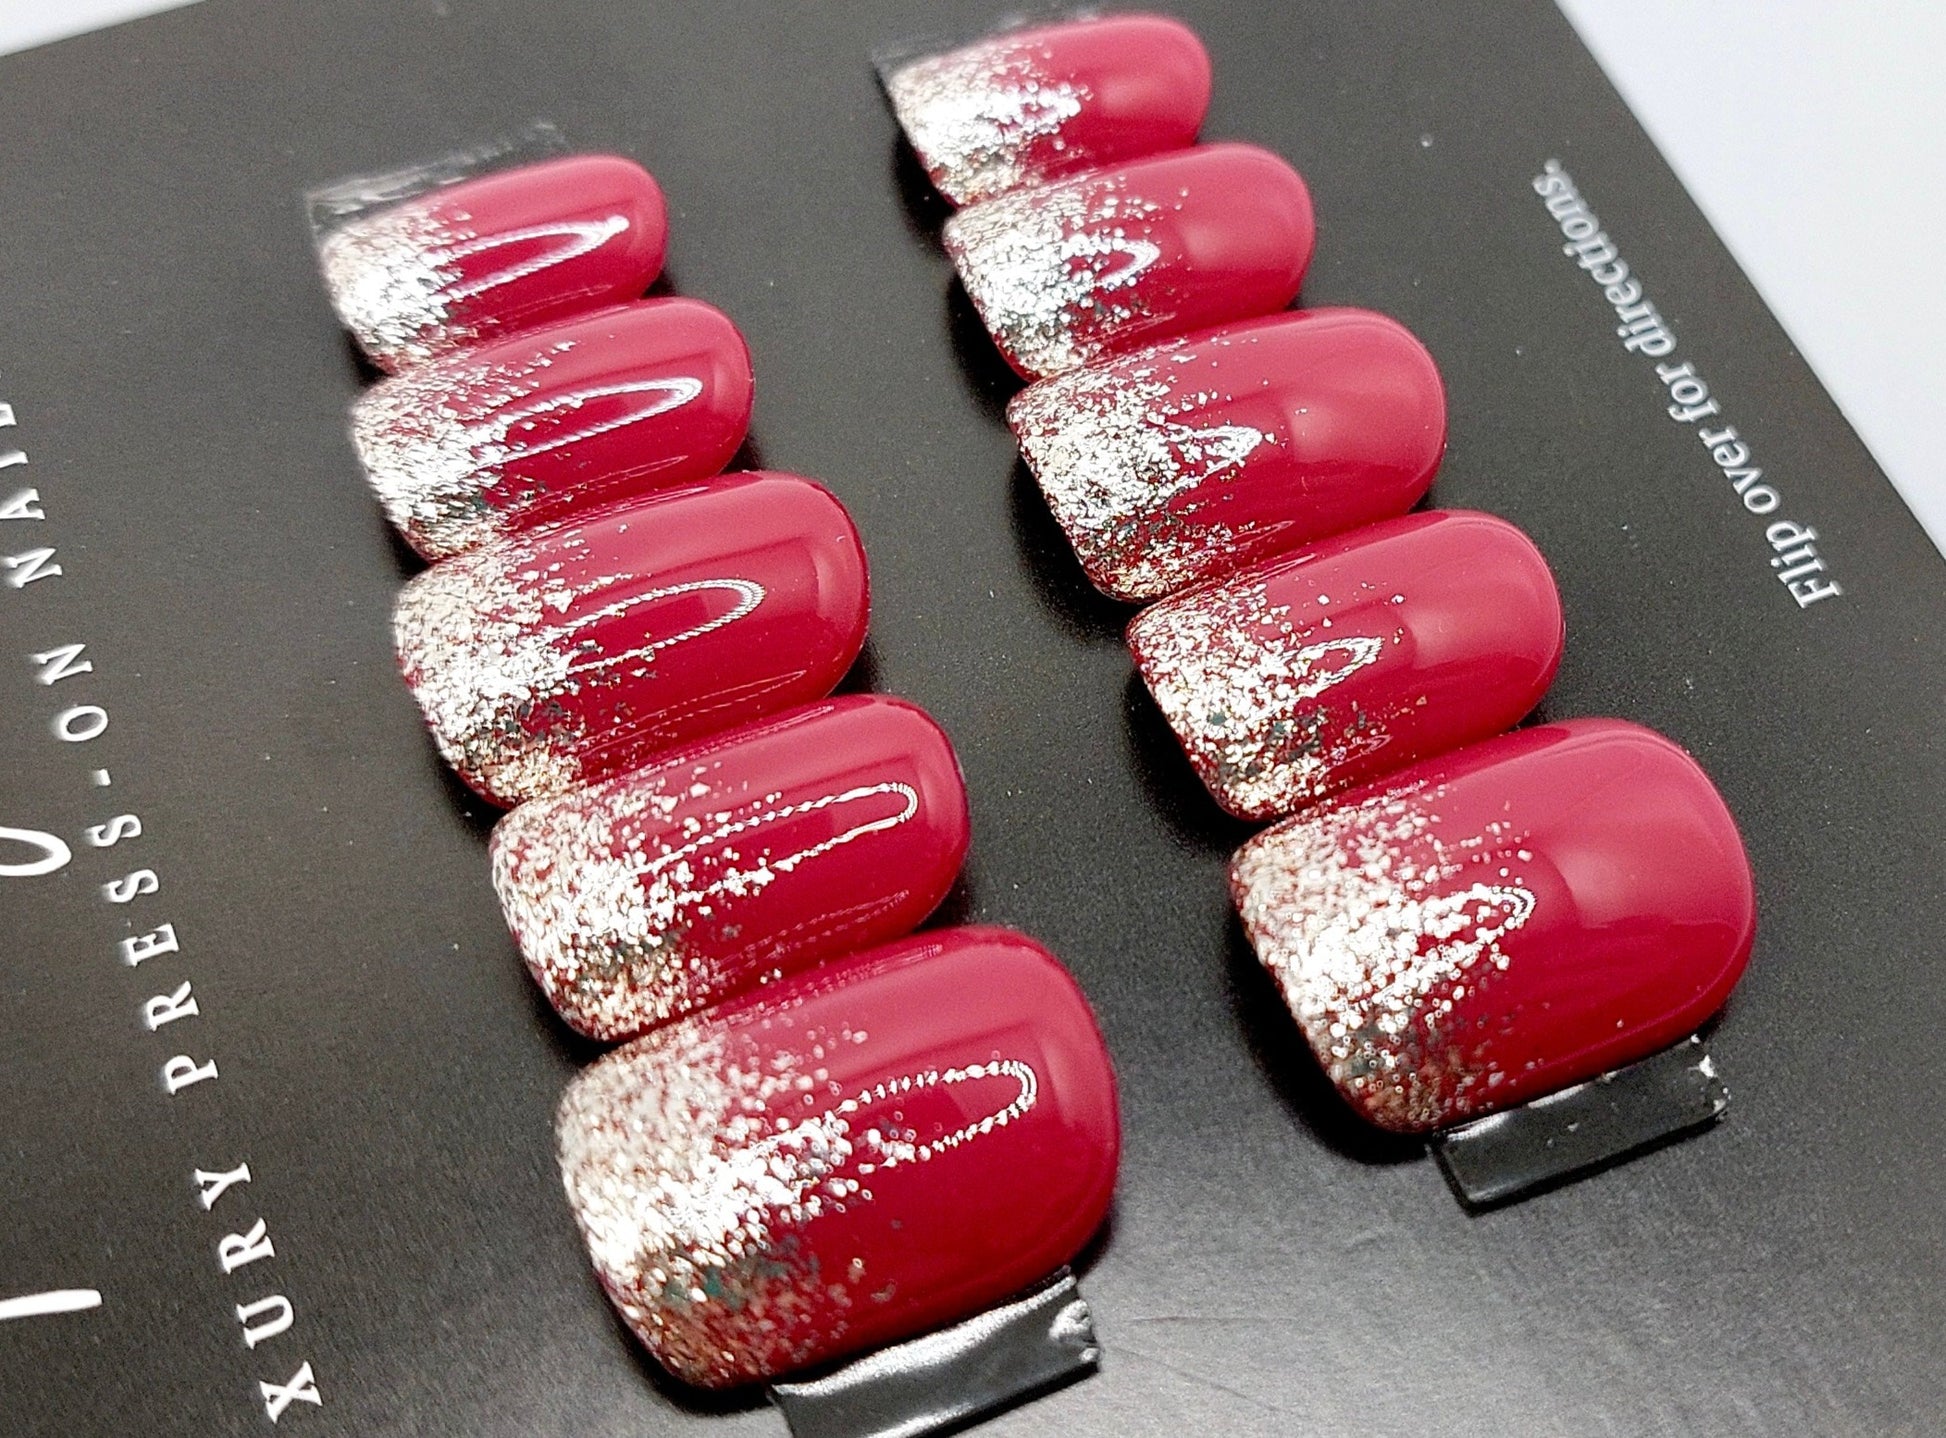 Raspberry Glitter Tips with Silver Glitter on Short Squoval Press on Nails. Handmade, resuable press ons. Fancyb nails.